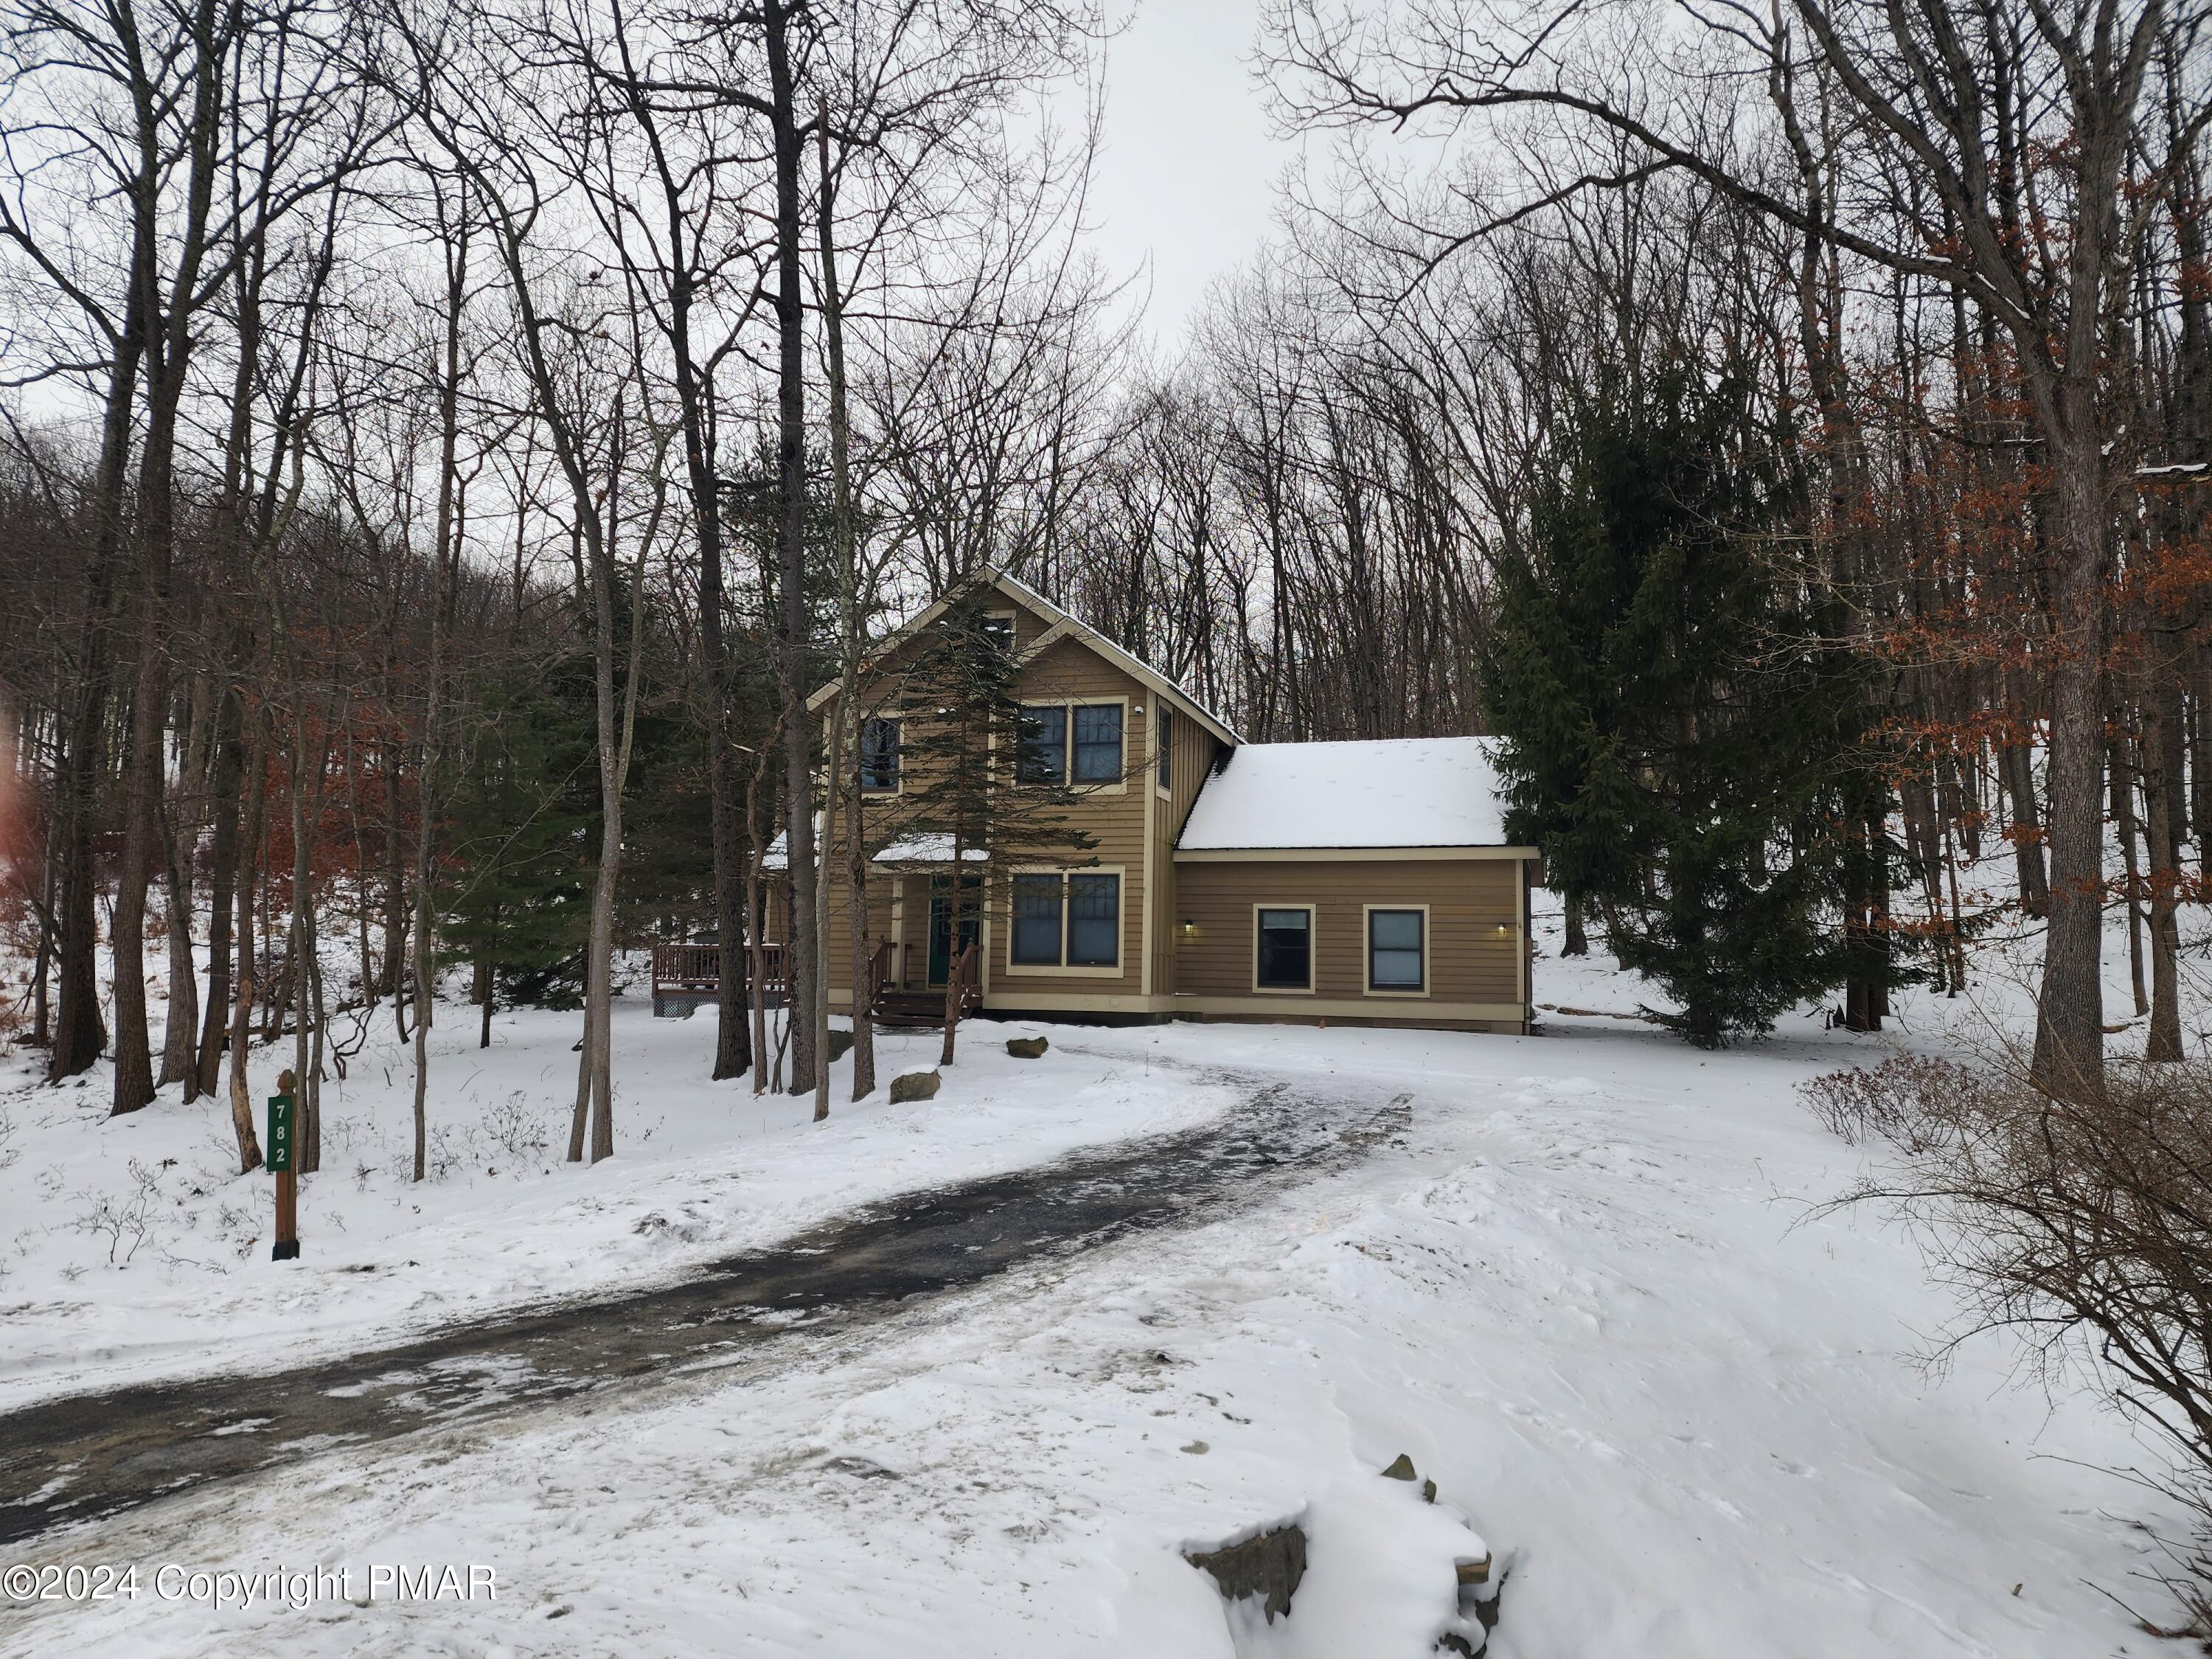 a view of a house with snow on the road